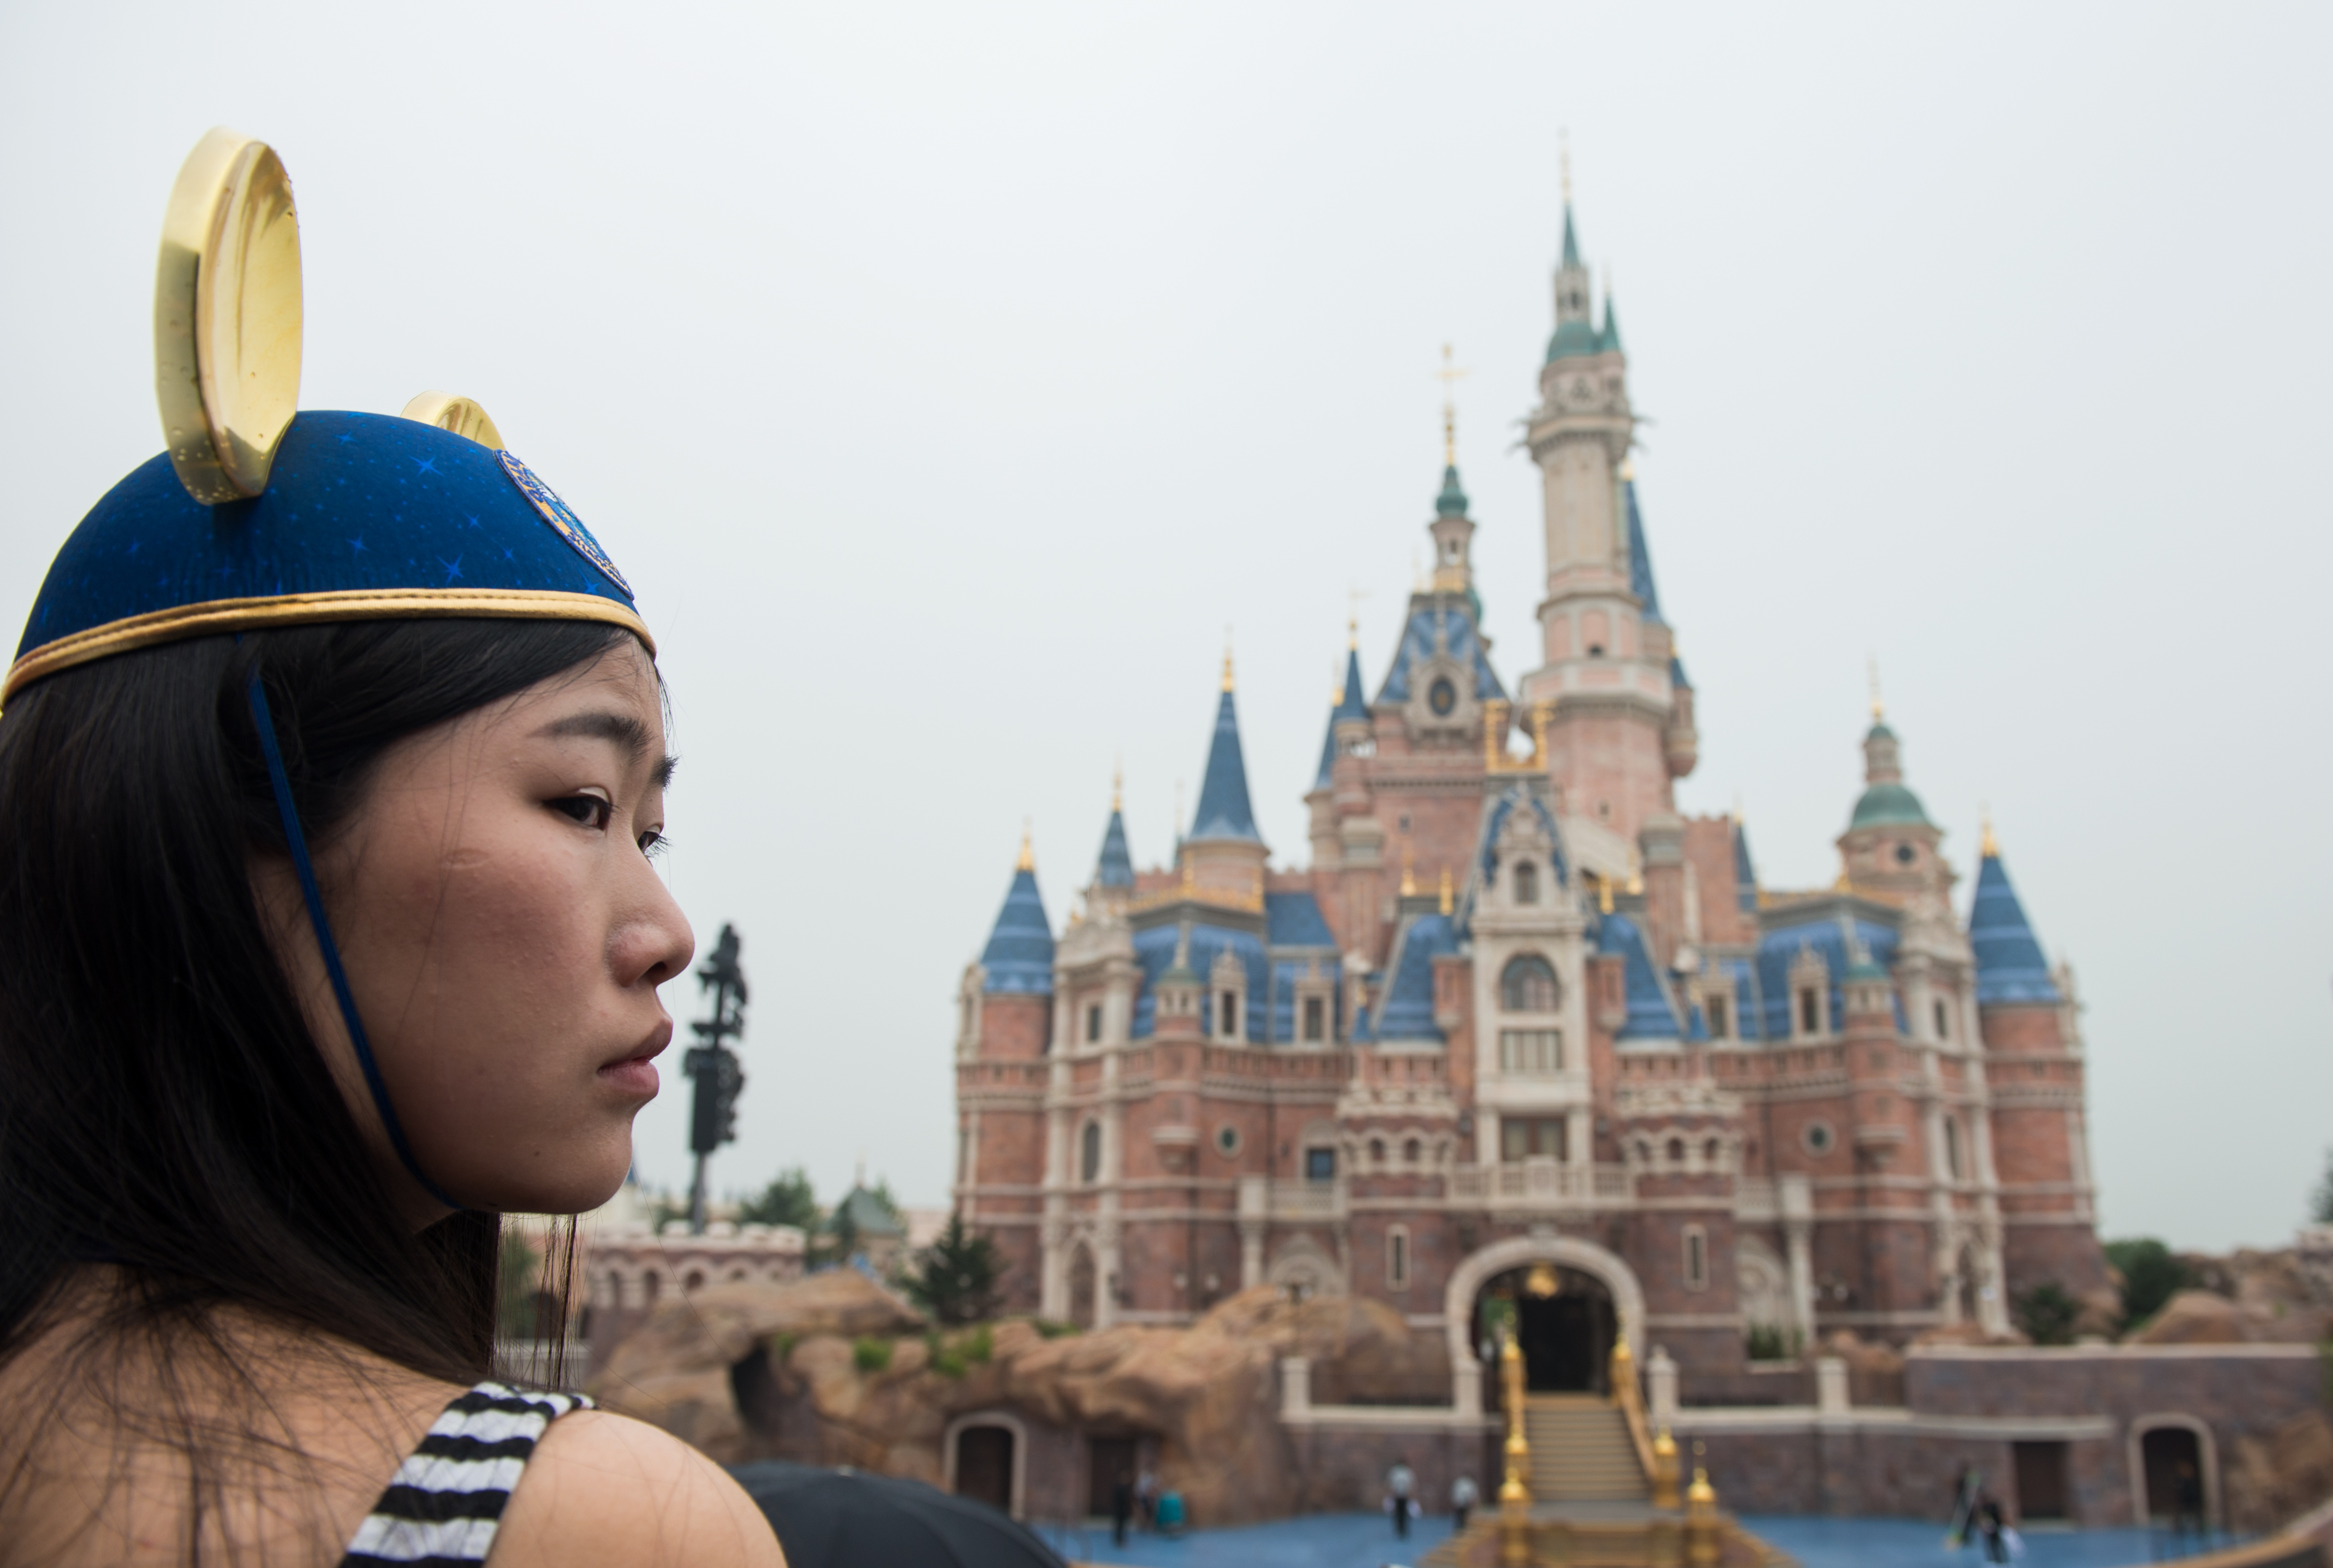 A visitor wearing Mickey Mouse ears at the Shanghai Disney Resort on June 16, 2016.